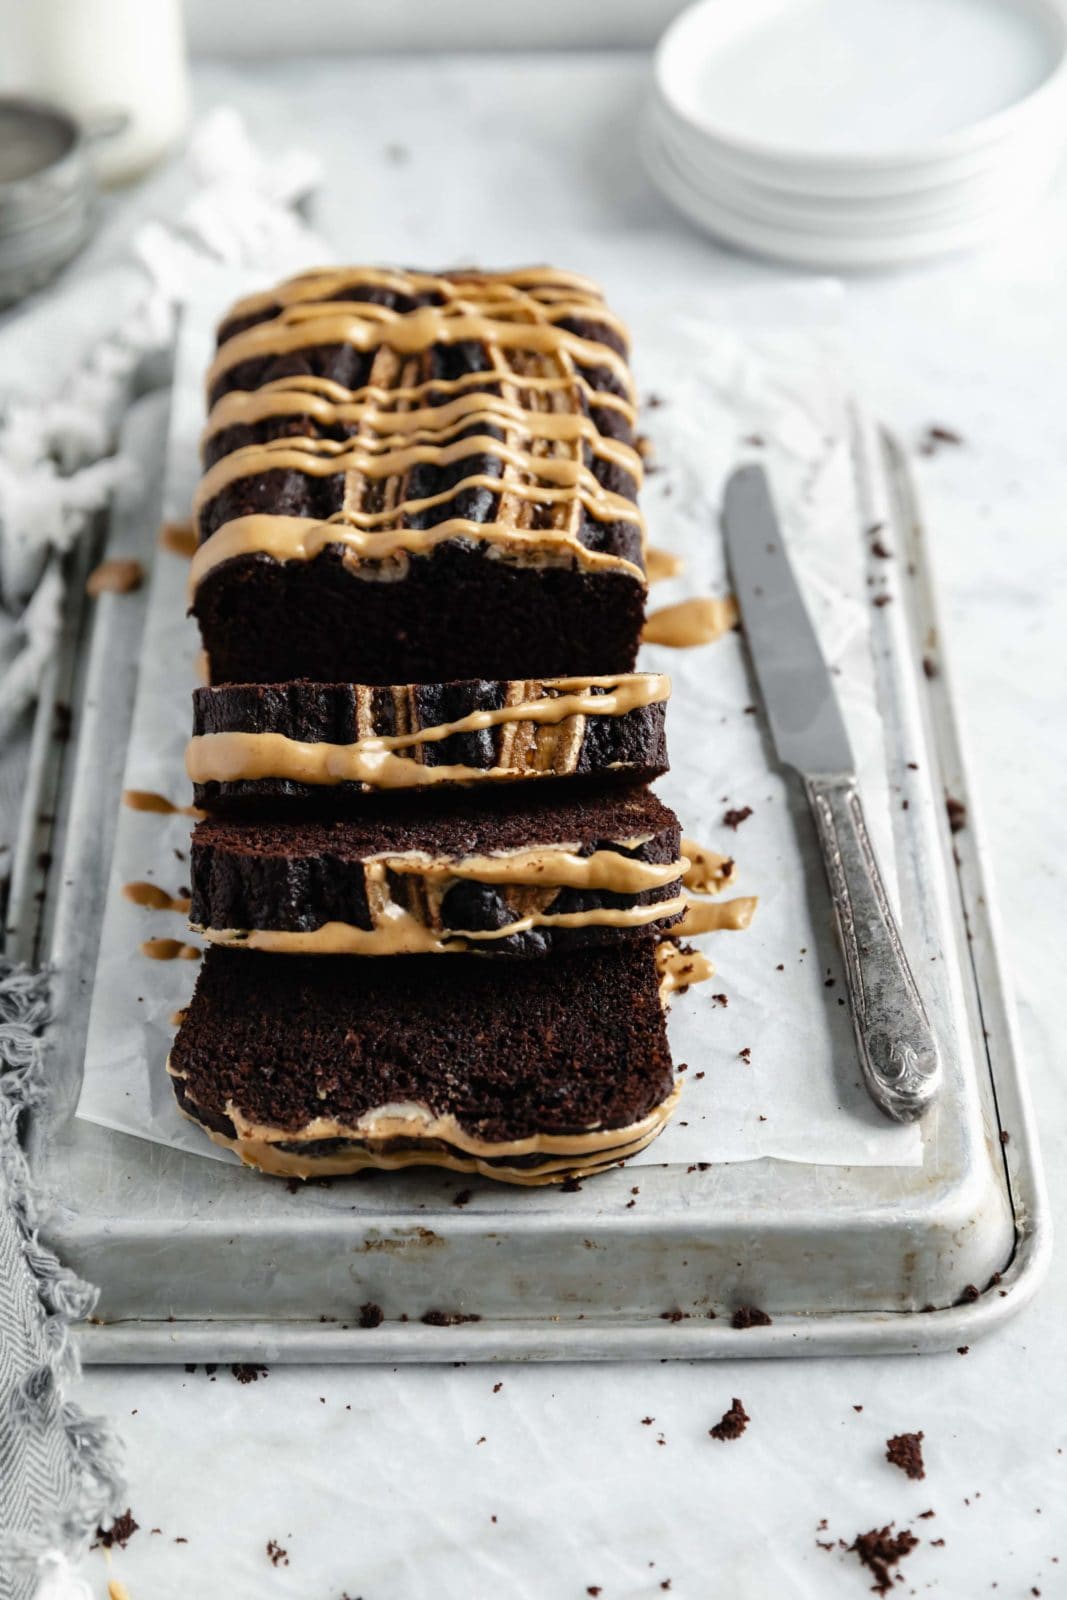 Calling all peanut butter chocolate lovers. AKA everyone. This chocolate peanut butter banana bread is about to blow your mind.